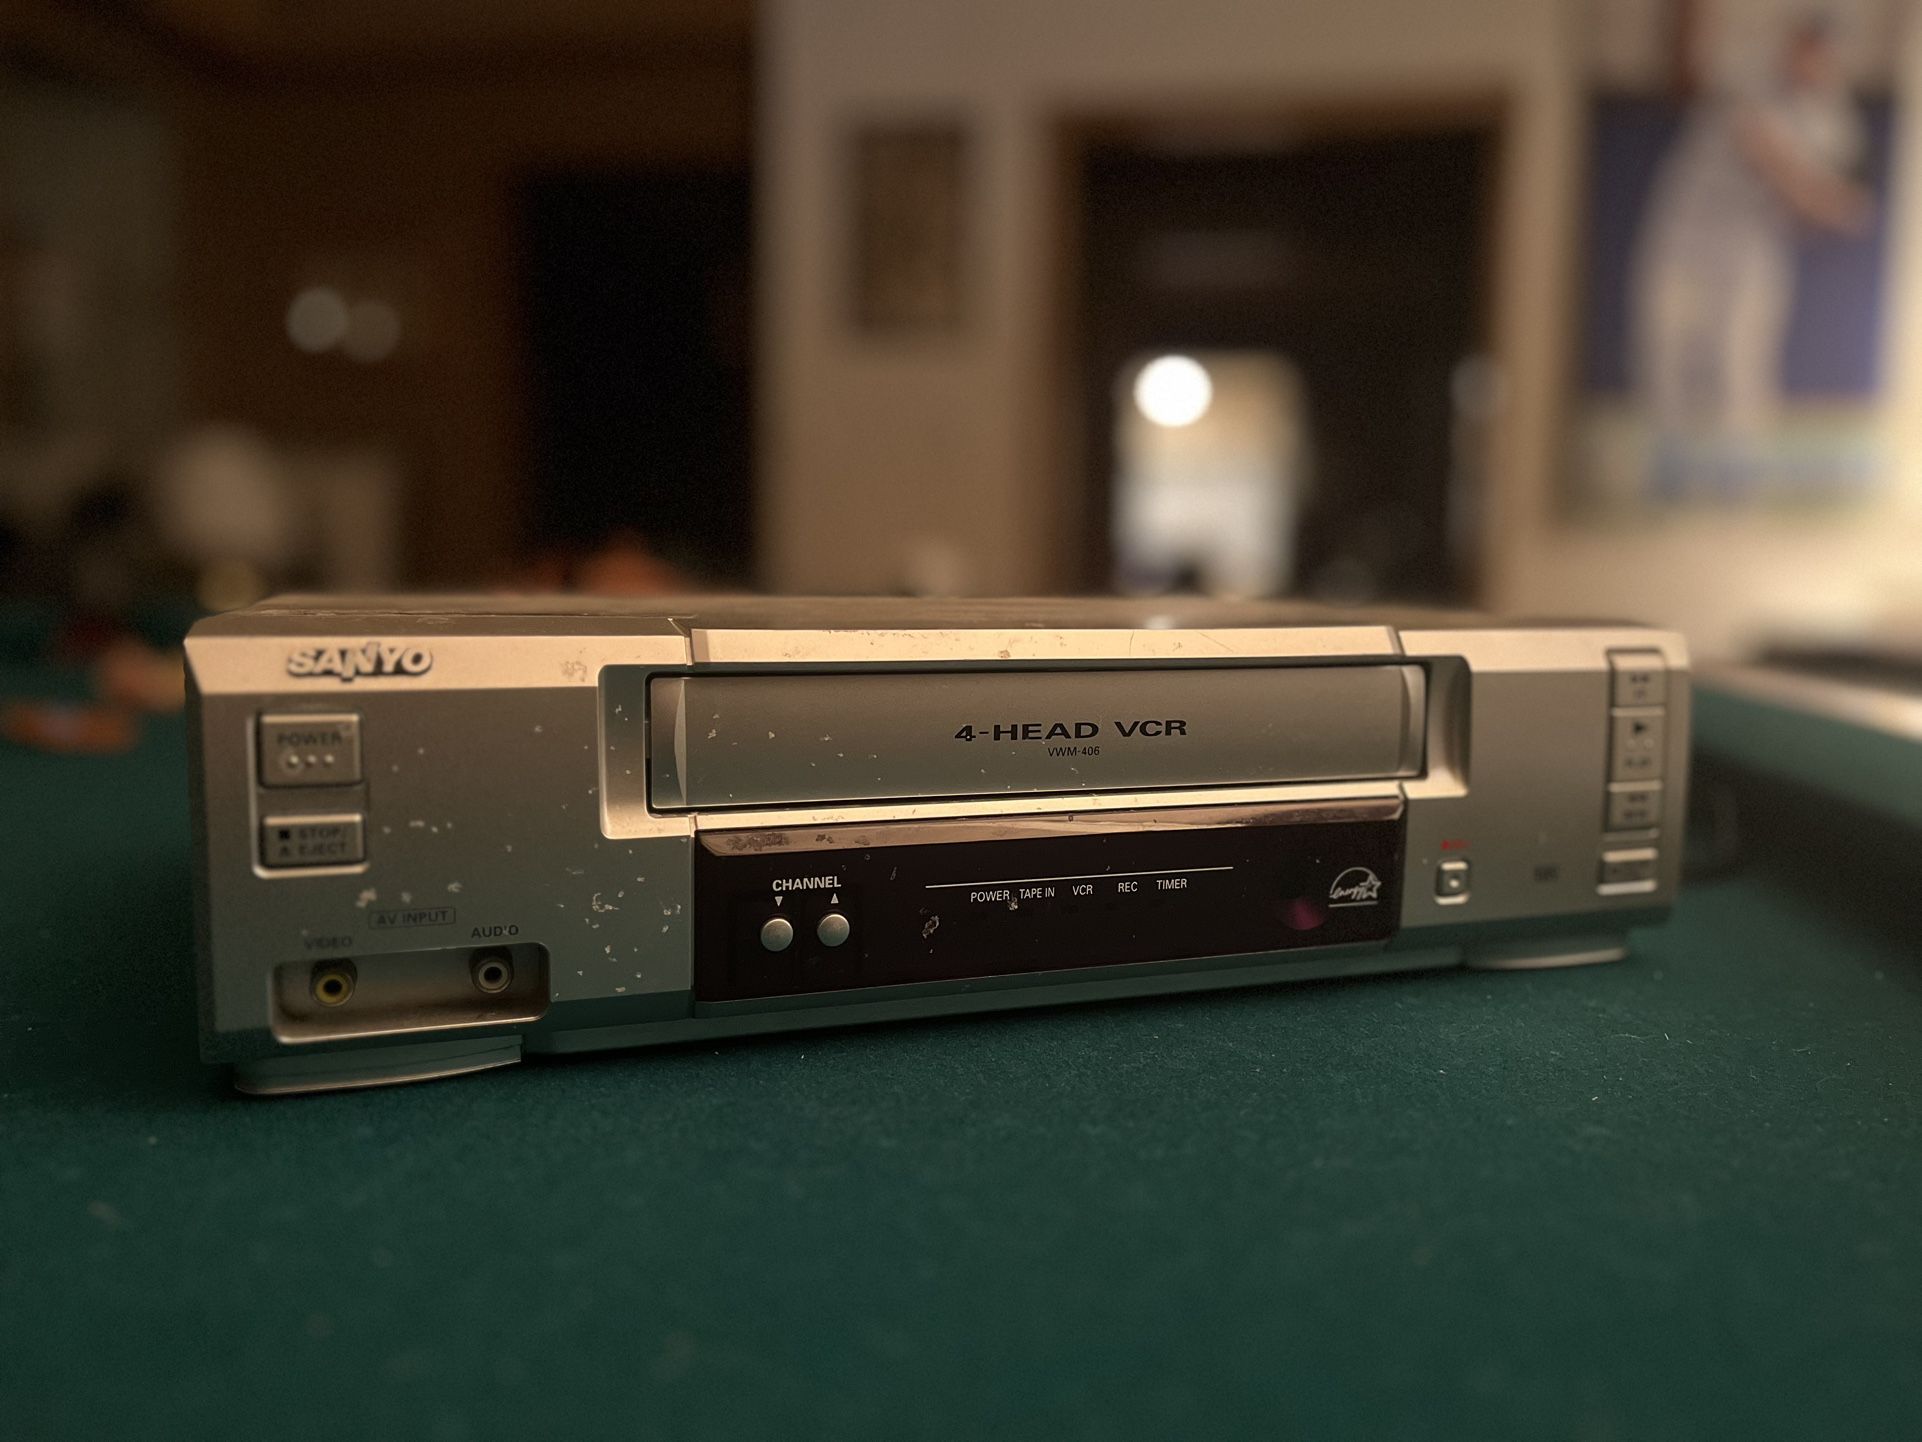 Sanyo VHS VCR (working)